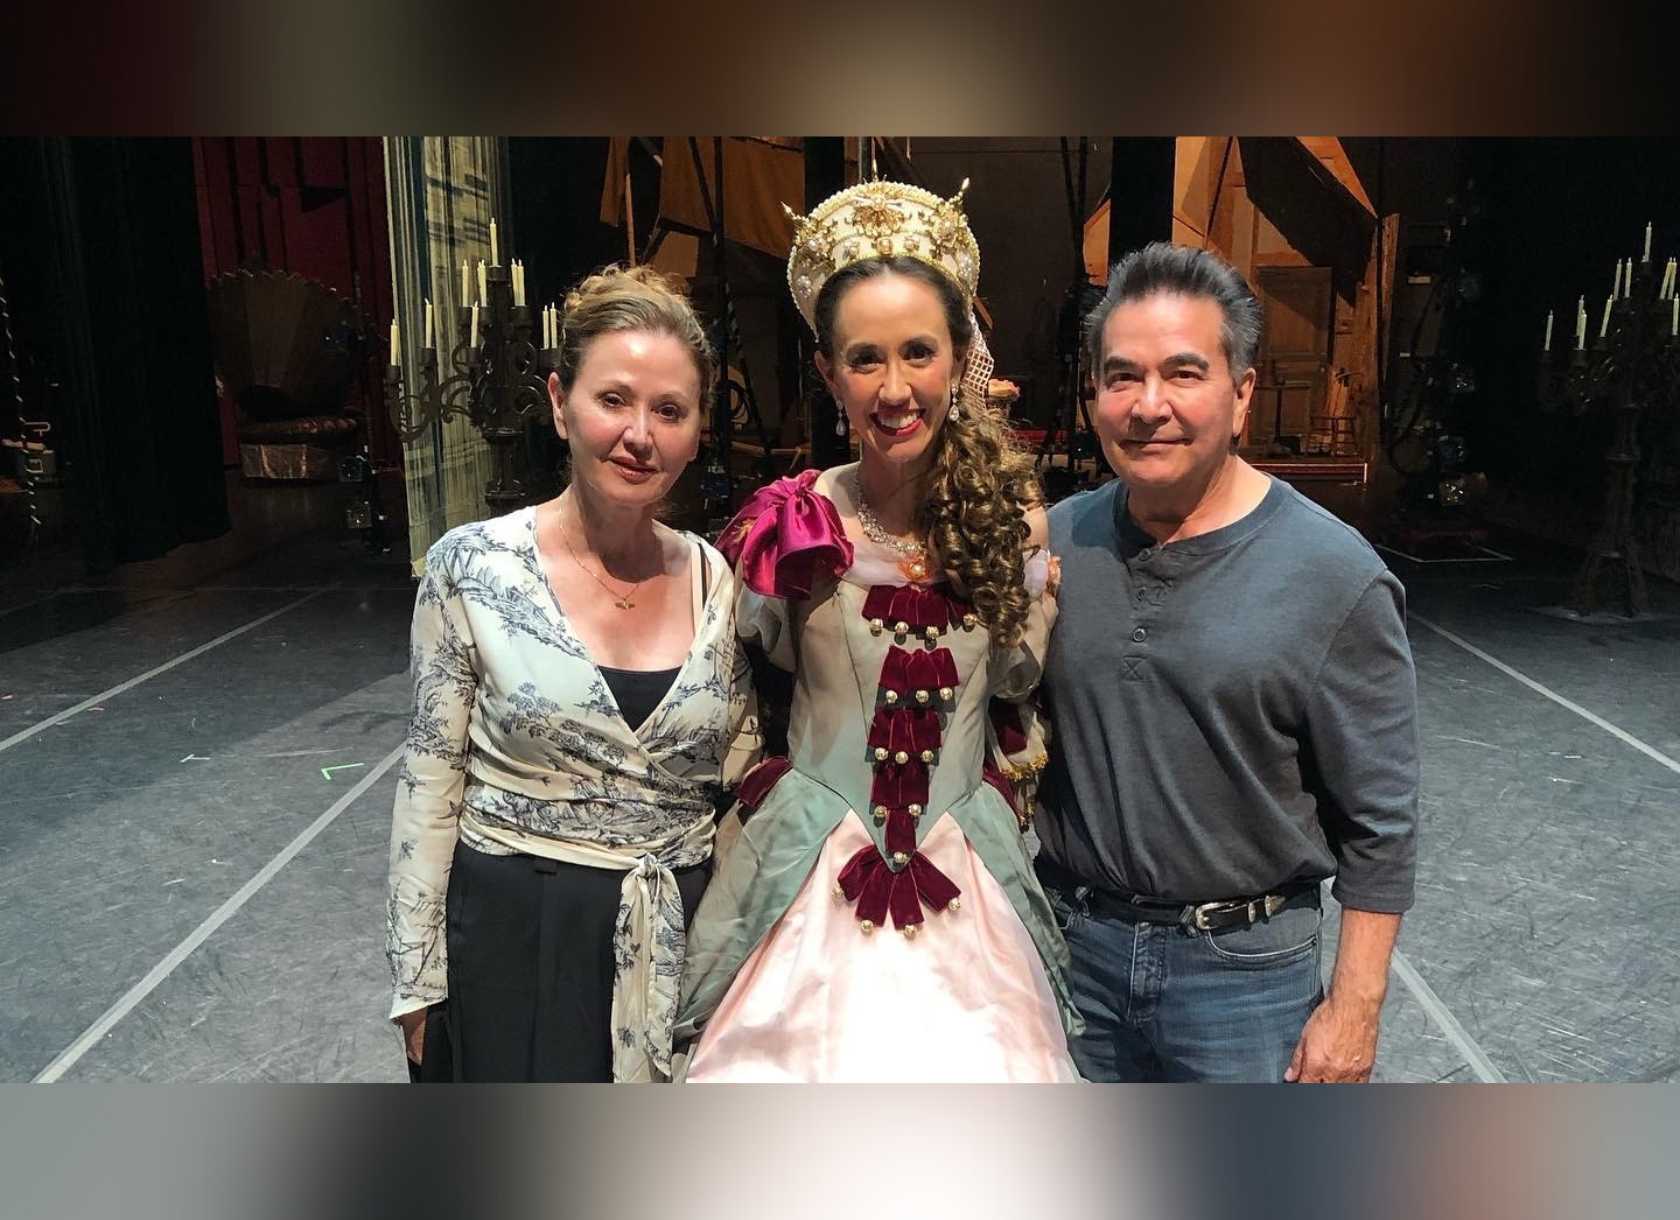 Ferrin Ruiz '08 poses with two other people after her performance of Sleeping Beauty